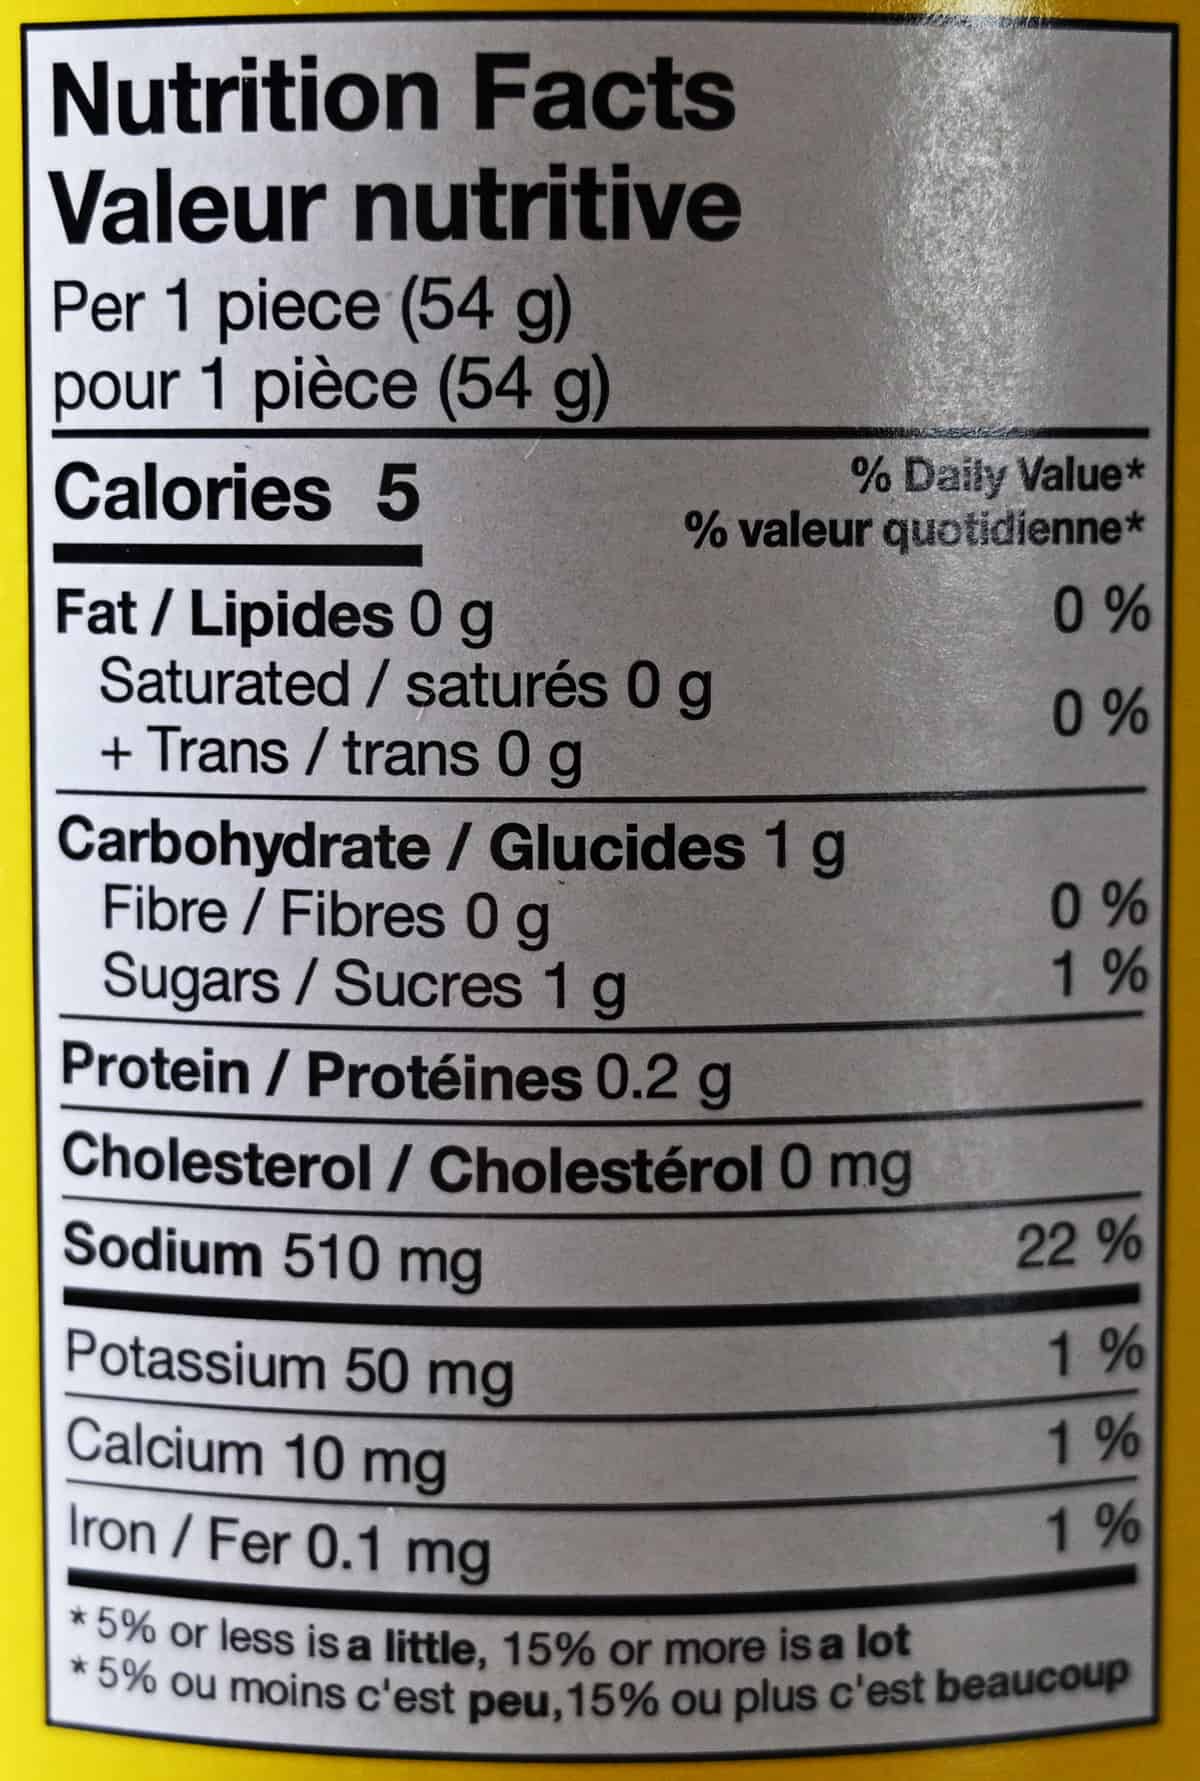 Image of the nutrition facts for the dill pickles from the jar.